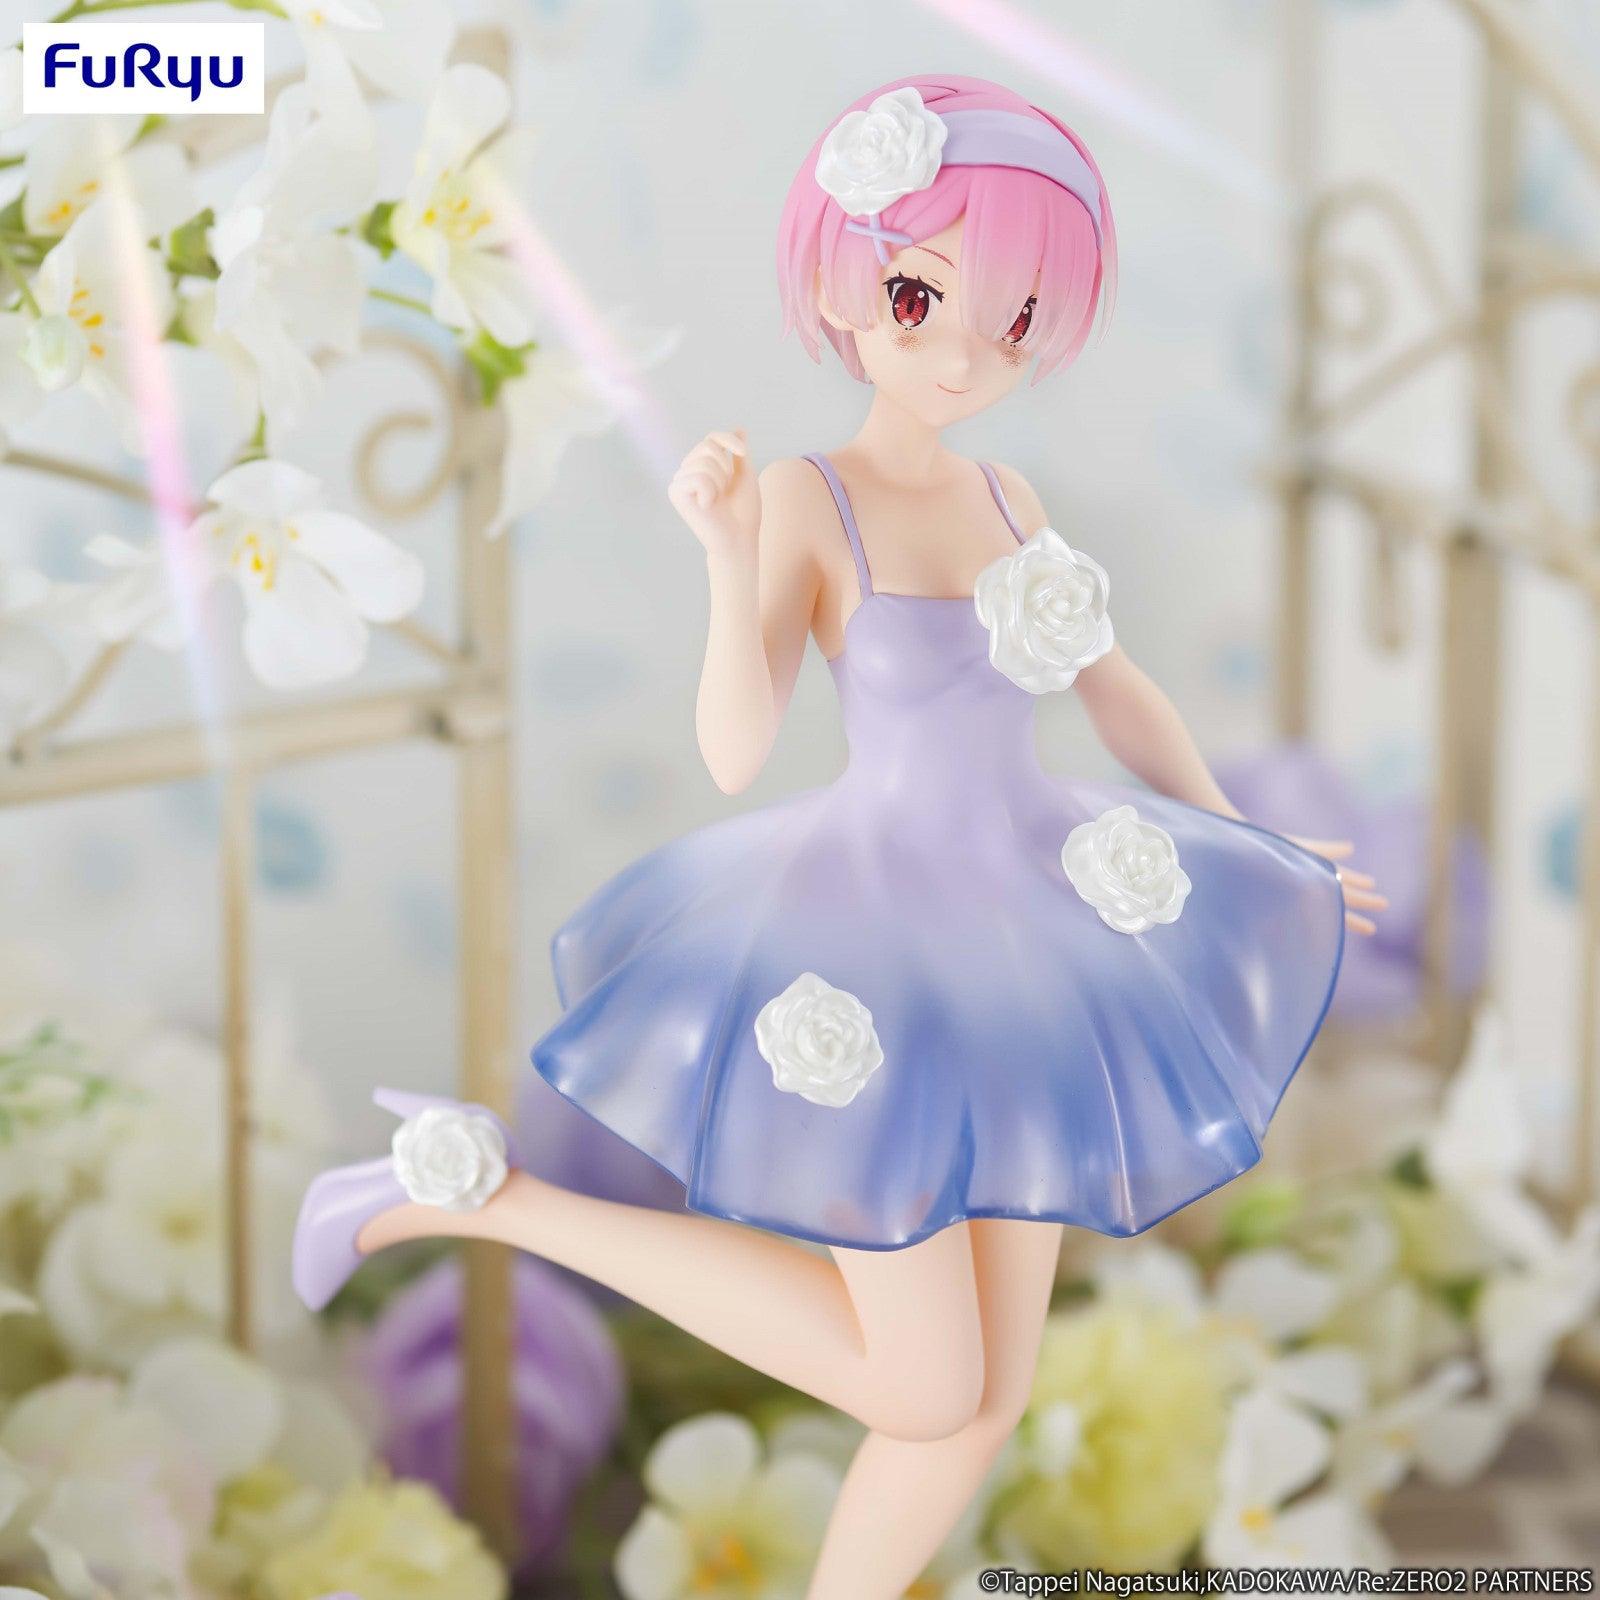 VR-106416 Re:ZERO Starting Life in Another World Trio Try It Figure Ram Flower Dress - Good Smile Company - Titan Pop Culture